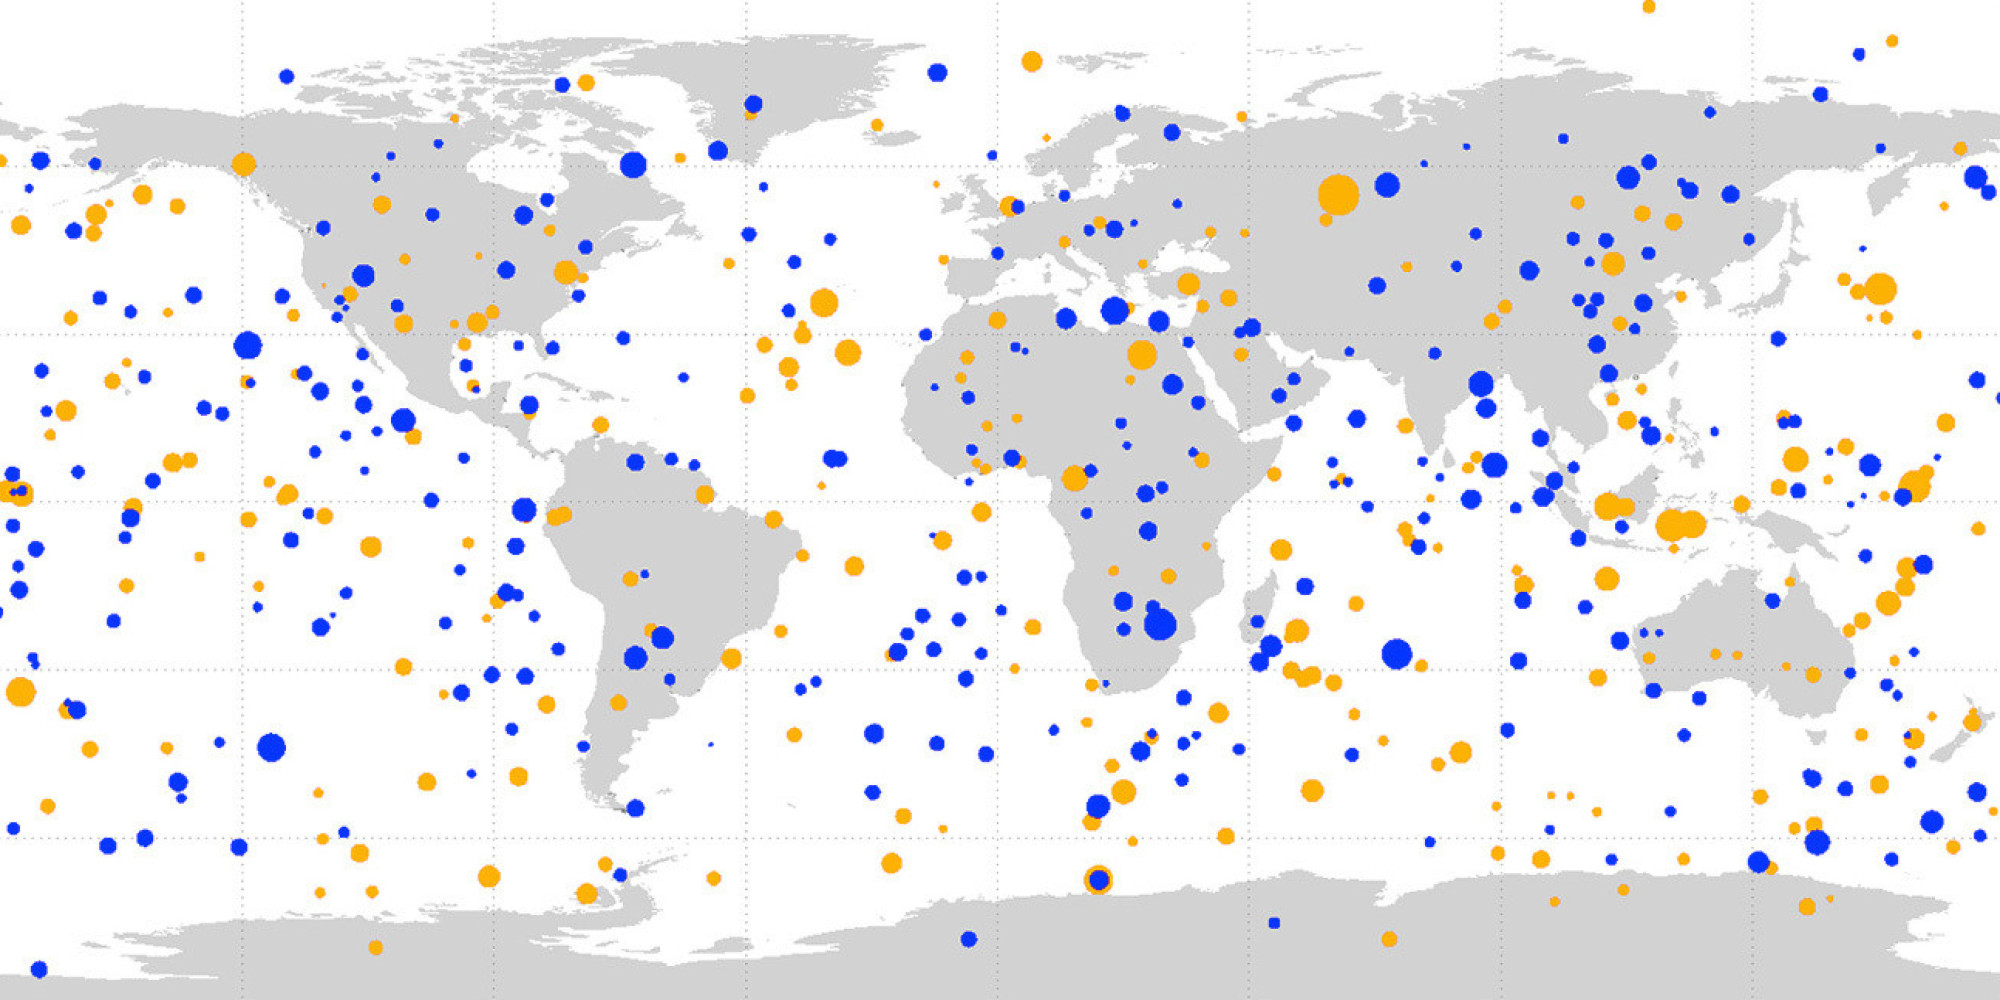 Scary New Asteroid Impact Map Shows Space Rocks Hit Us 'All The Time'2000 x 1000